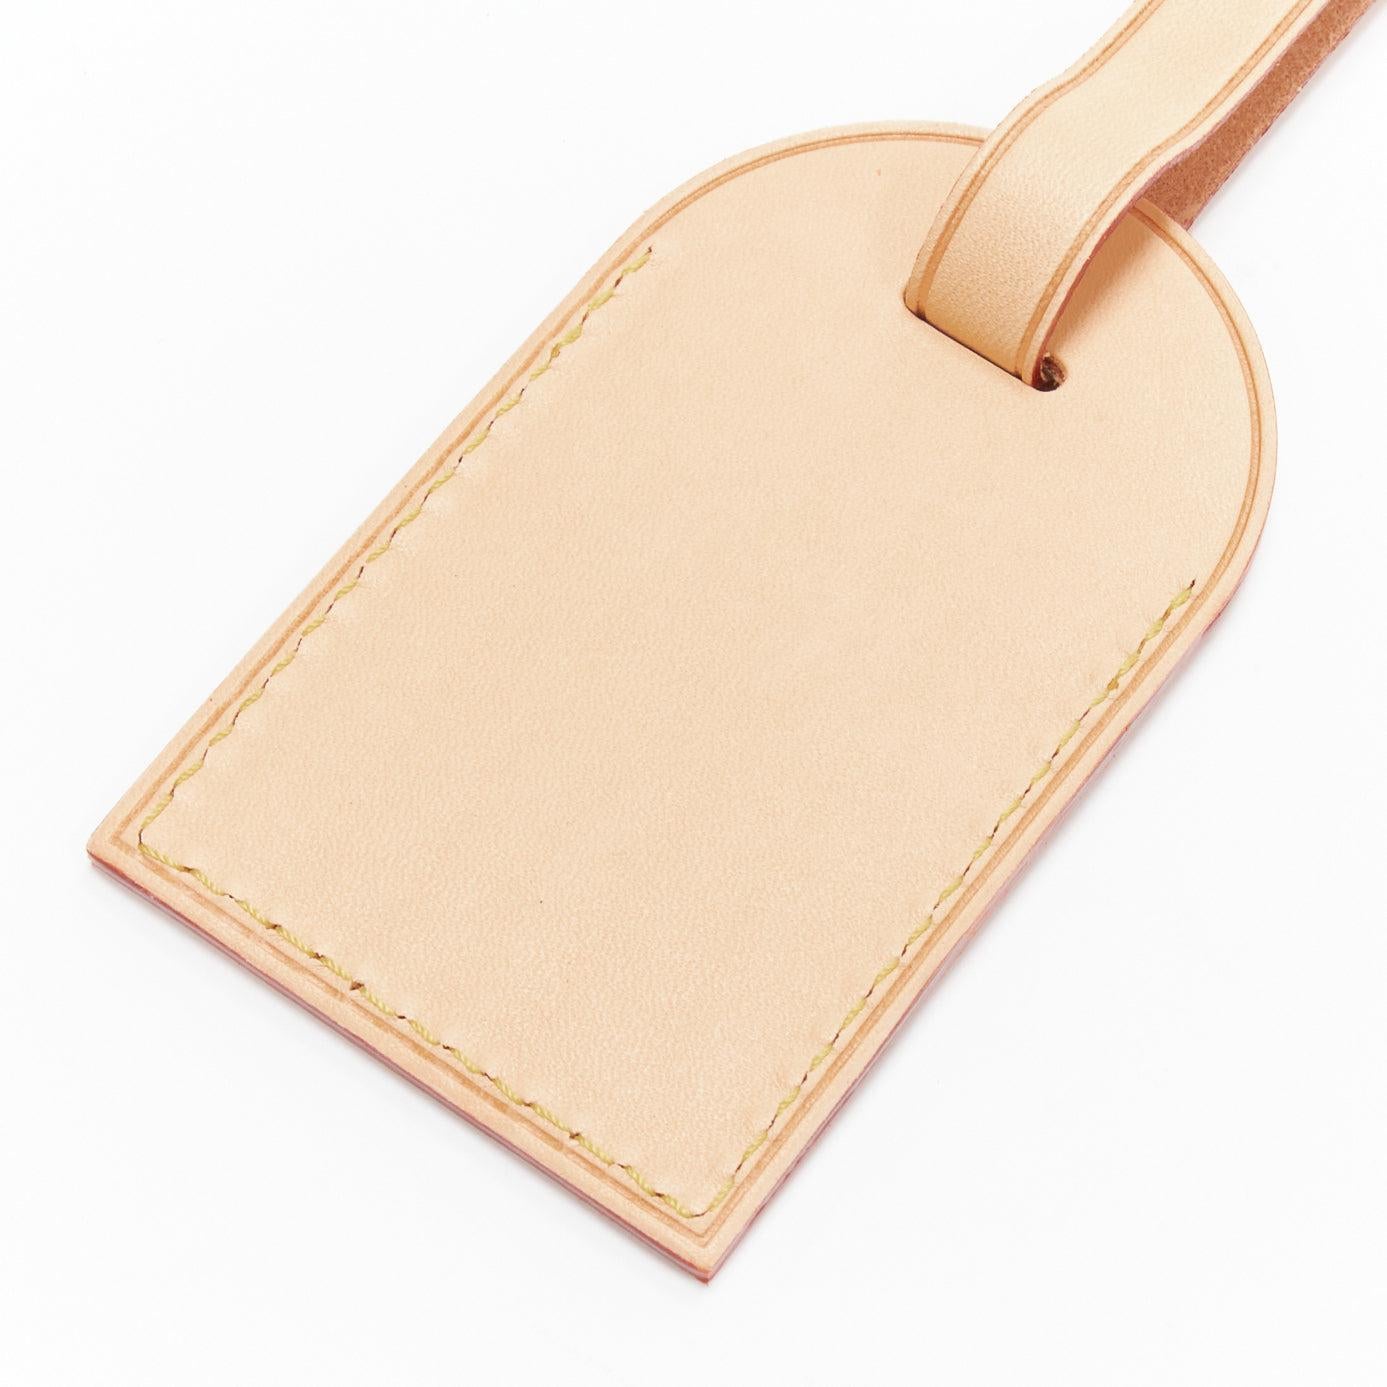 LOUIS VUITTON Vachetta leather gold HT foil stamp luggage tag
Reference: BSHW/A00133
Brand: Louis Vuitton
Material: Leather
Color: Nude, Gold
Pattern: Solid
Closure: Belt
Made in: France

CONDITION:
Condition: Excellent, this item was pre-owned and